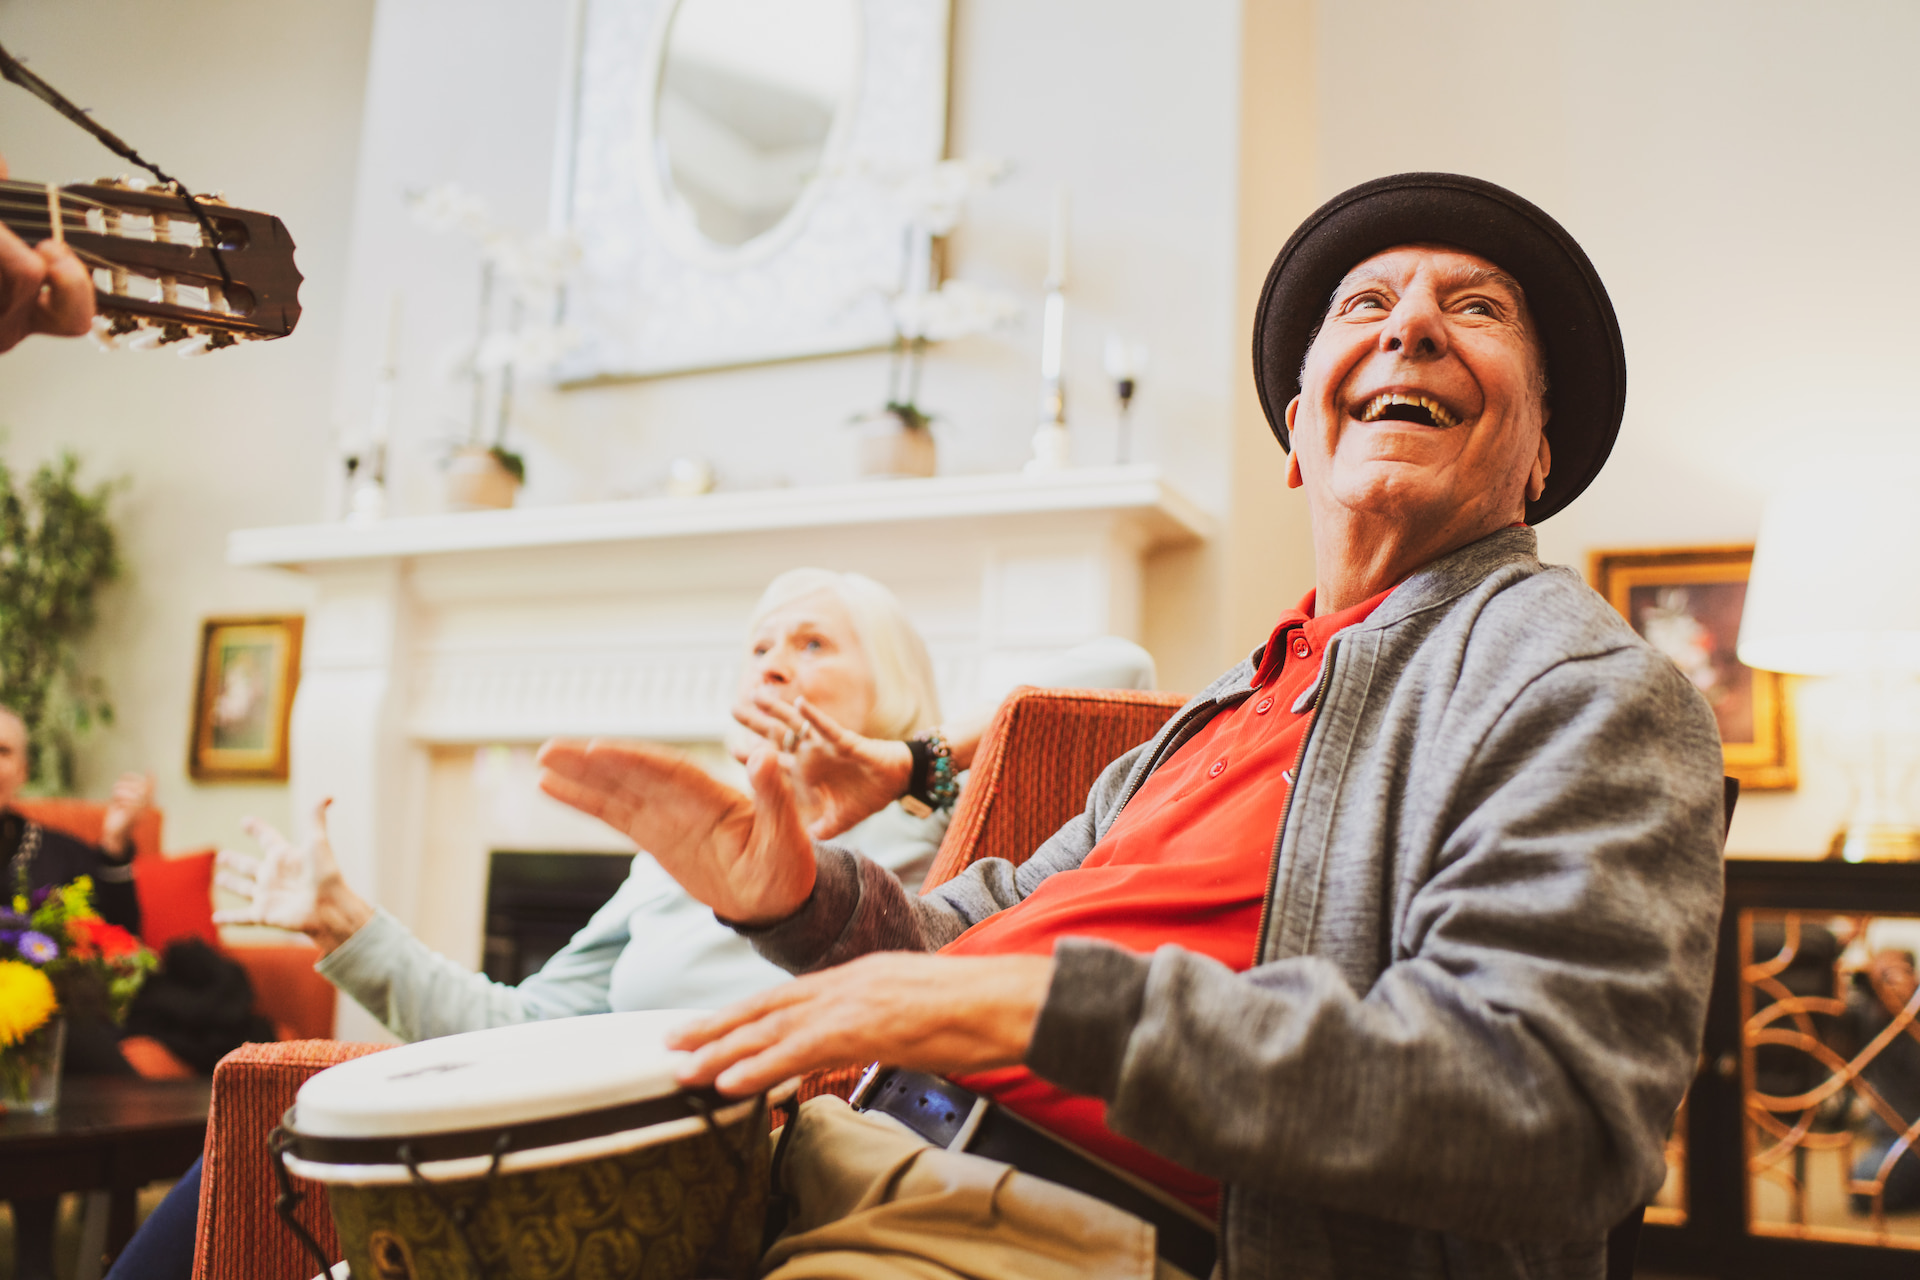 Two residents smiling and playing the bongos